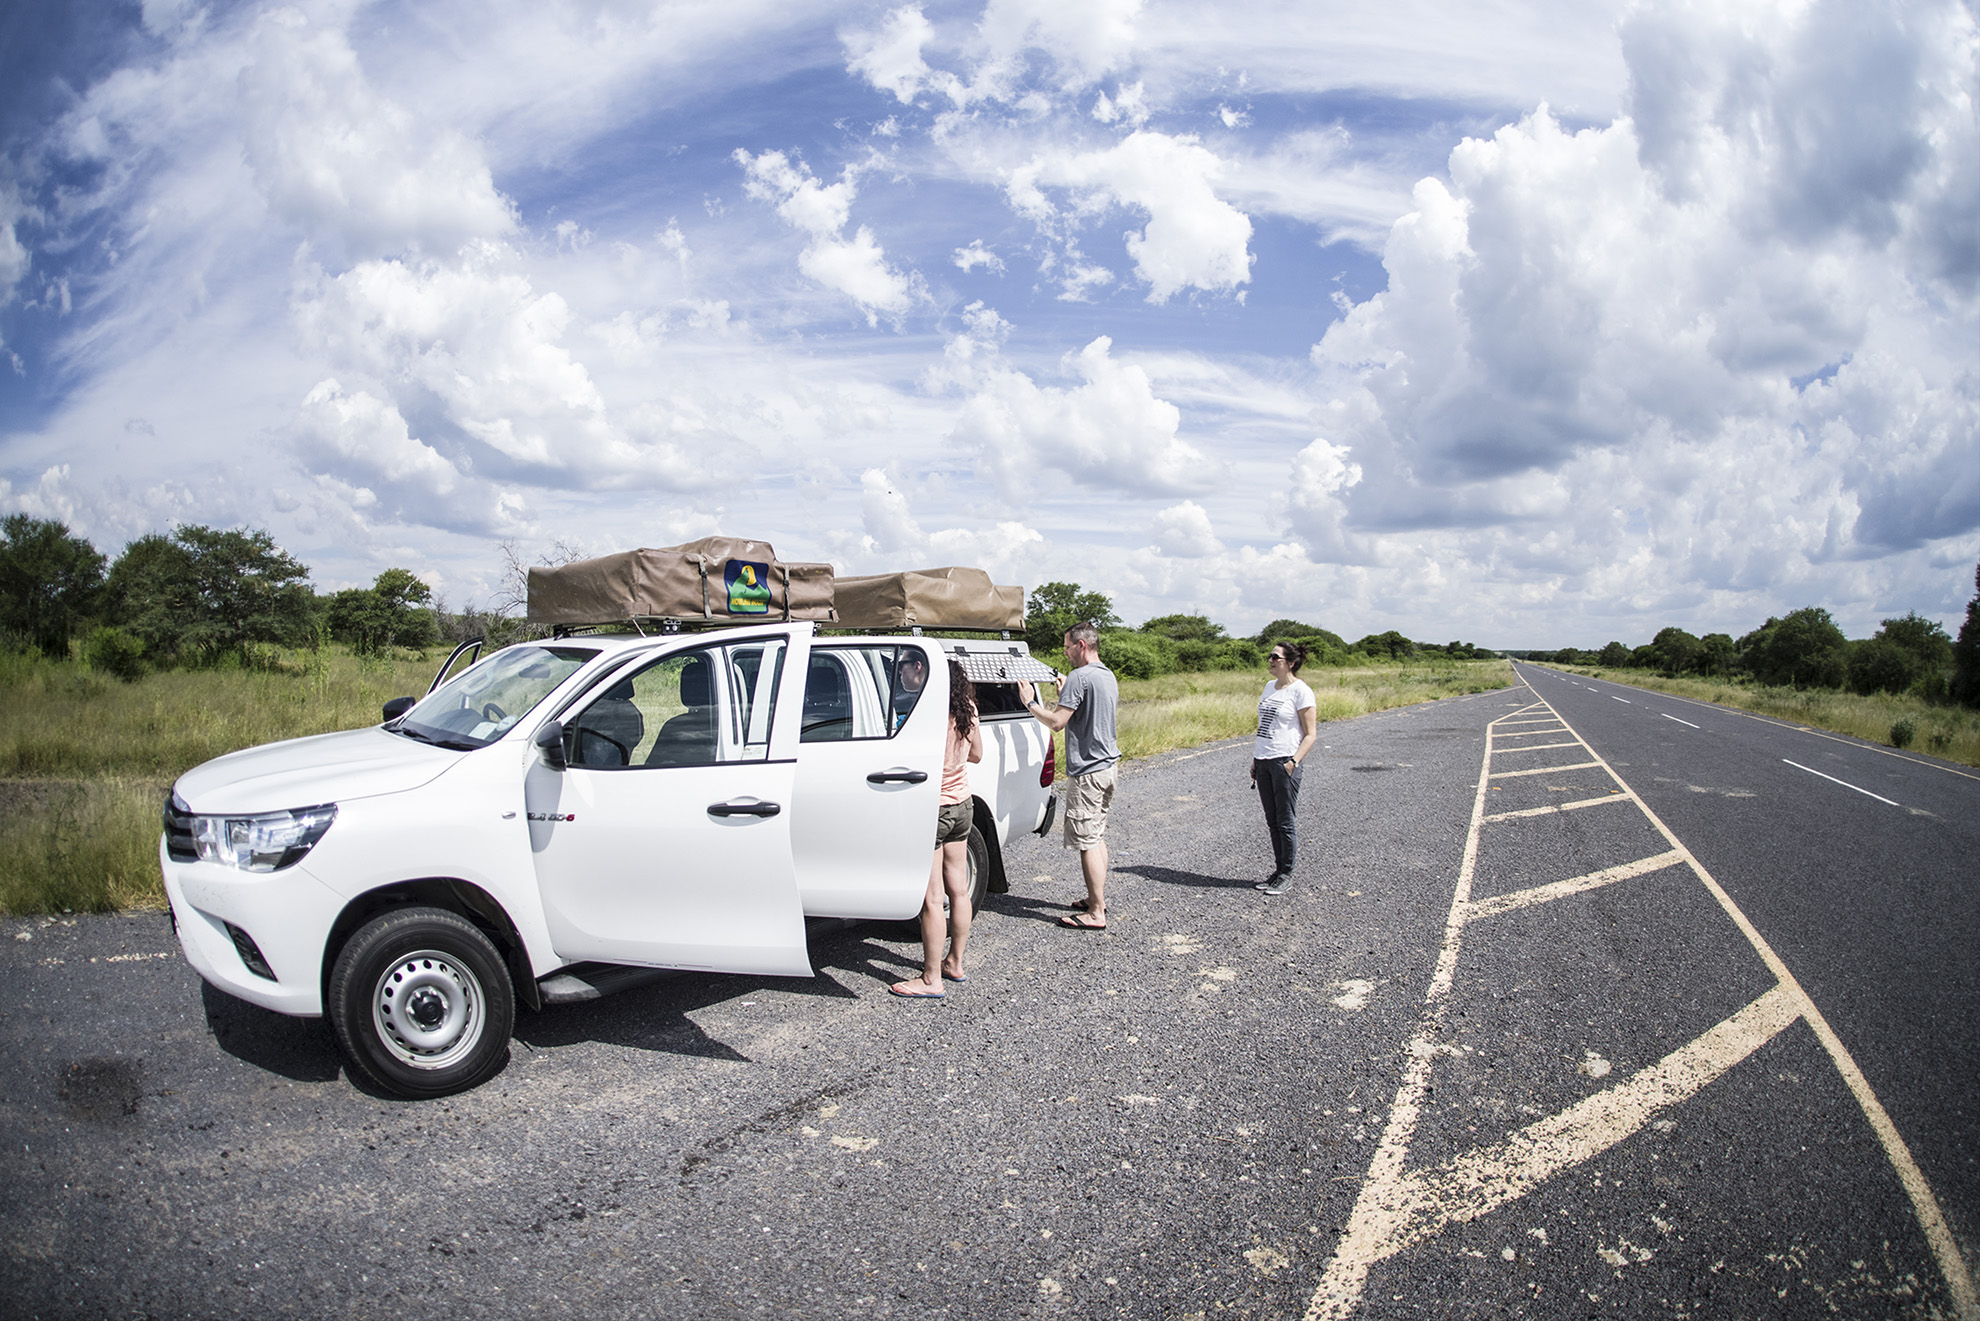 Border crossing and onward journey to Maun